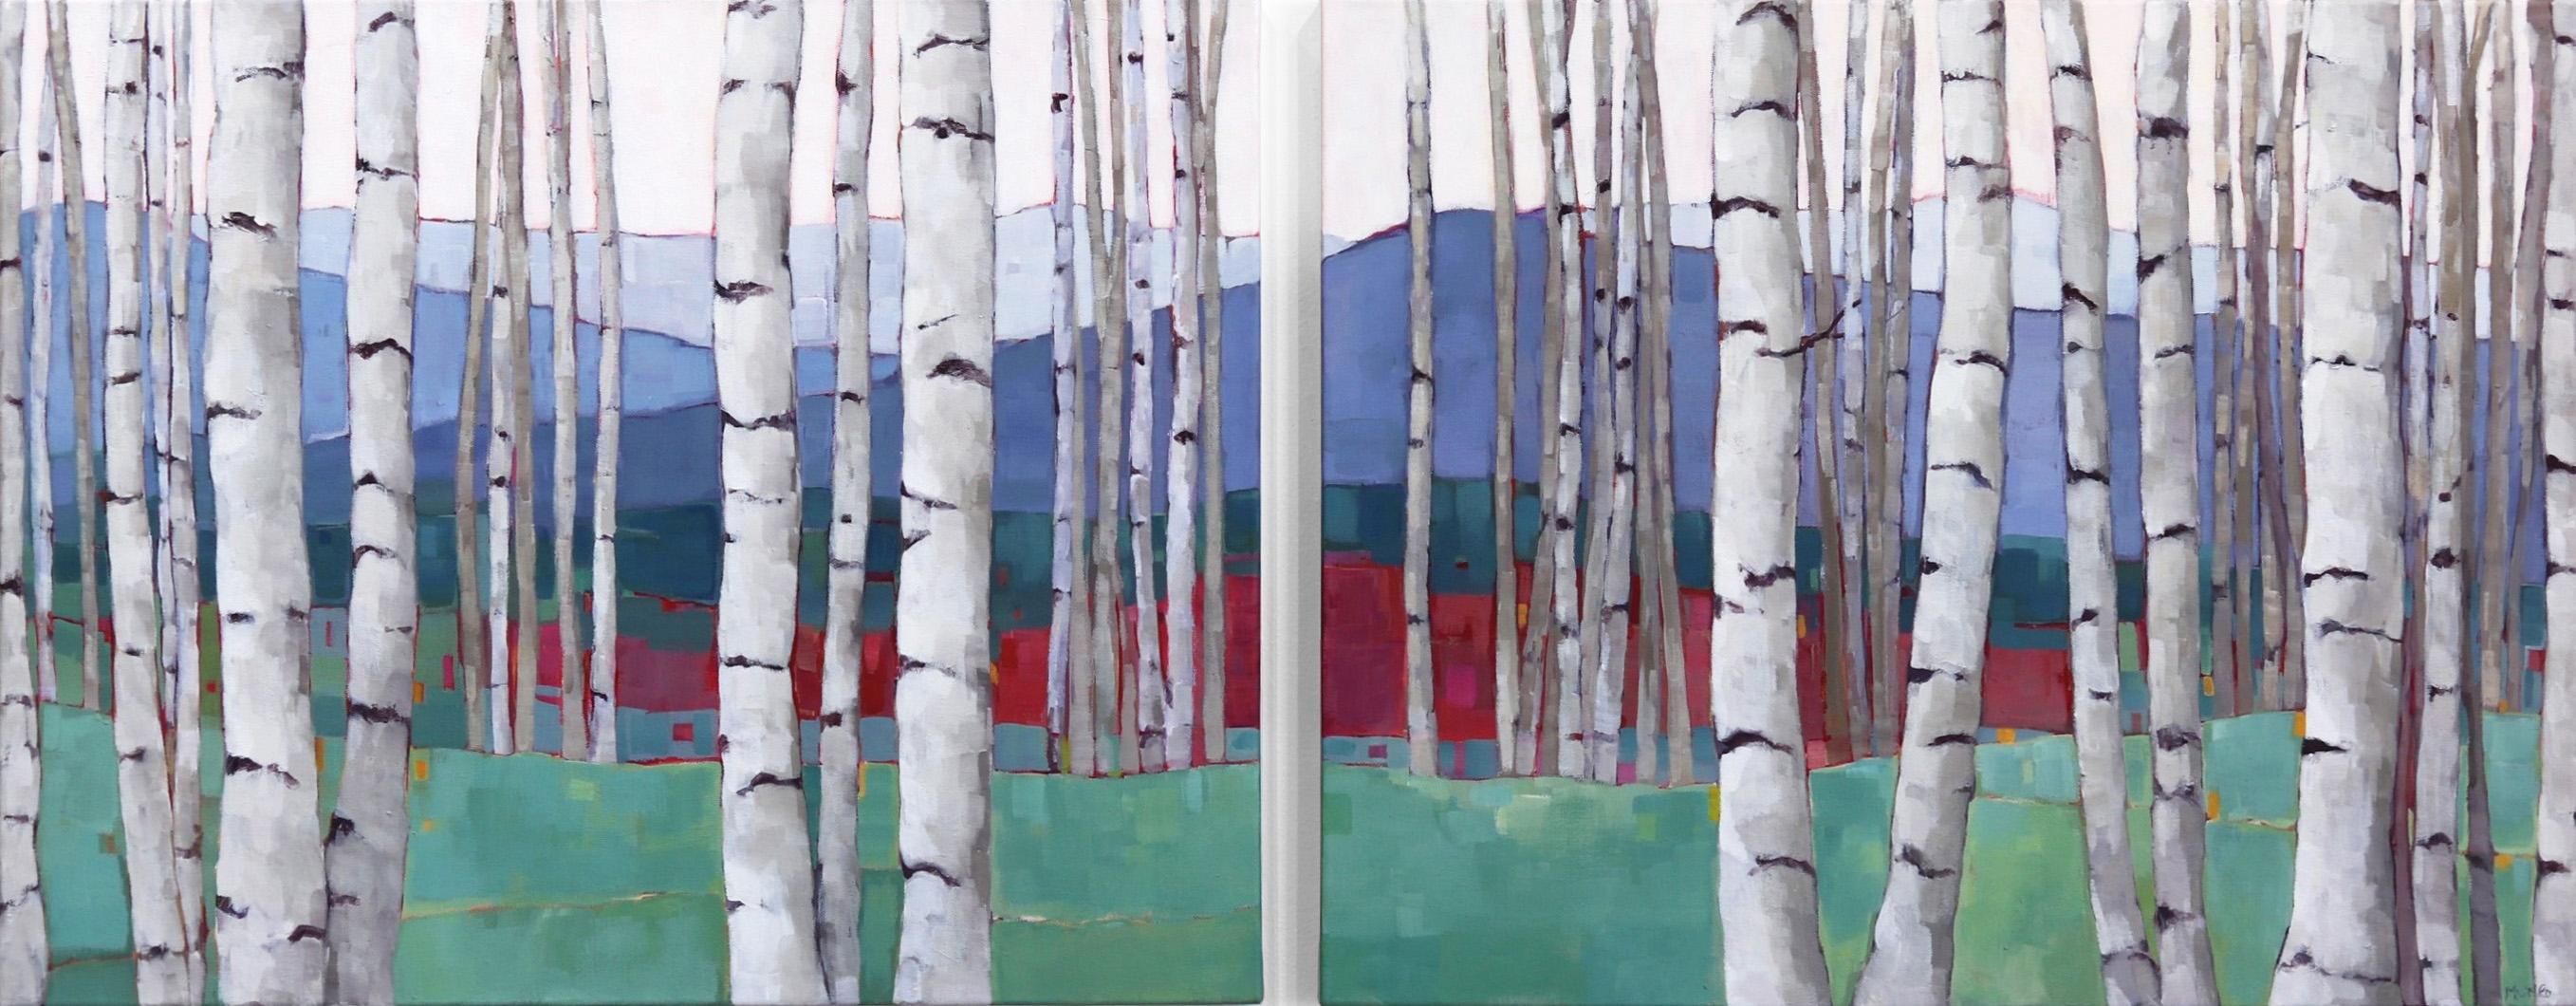 Vermont Landscape (Diptych) - Mixed Media Art by Beth Munro